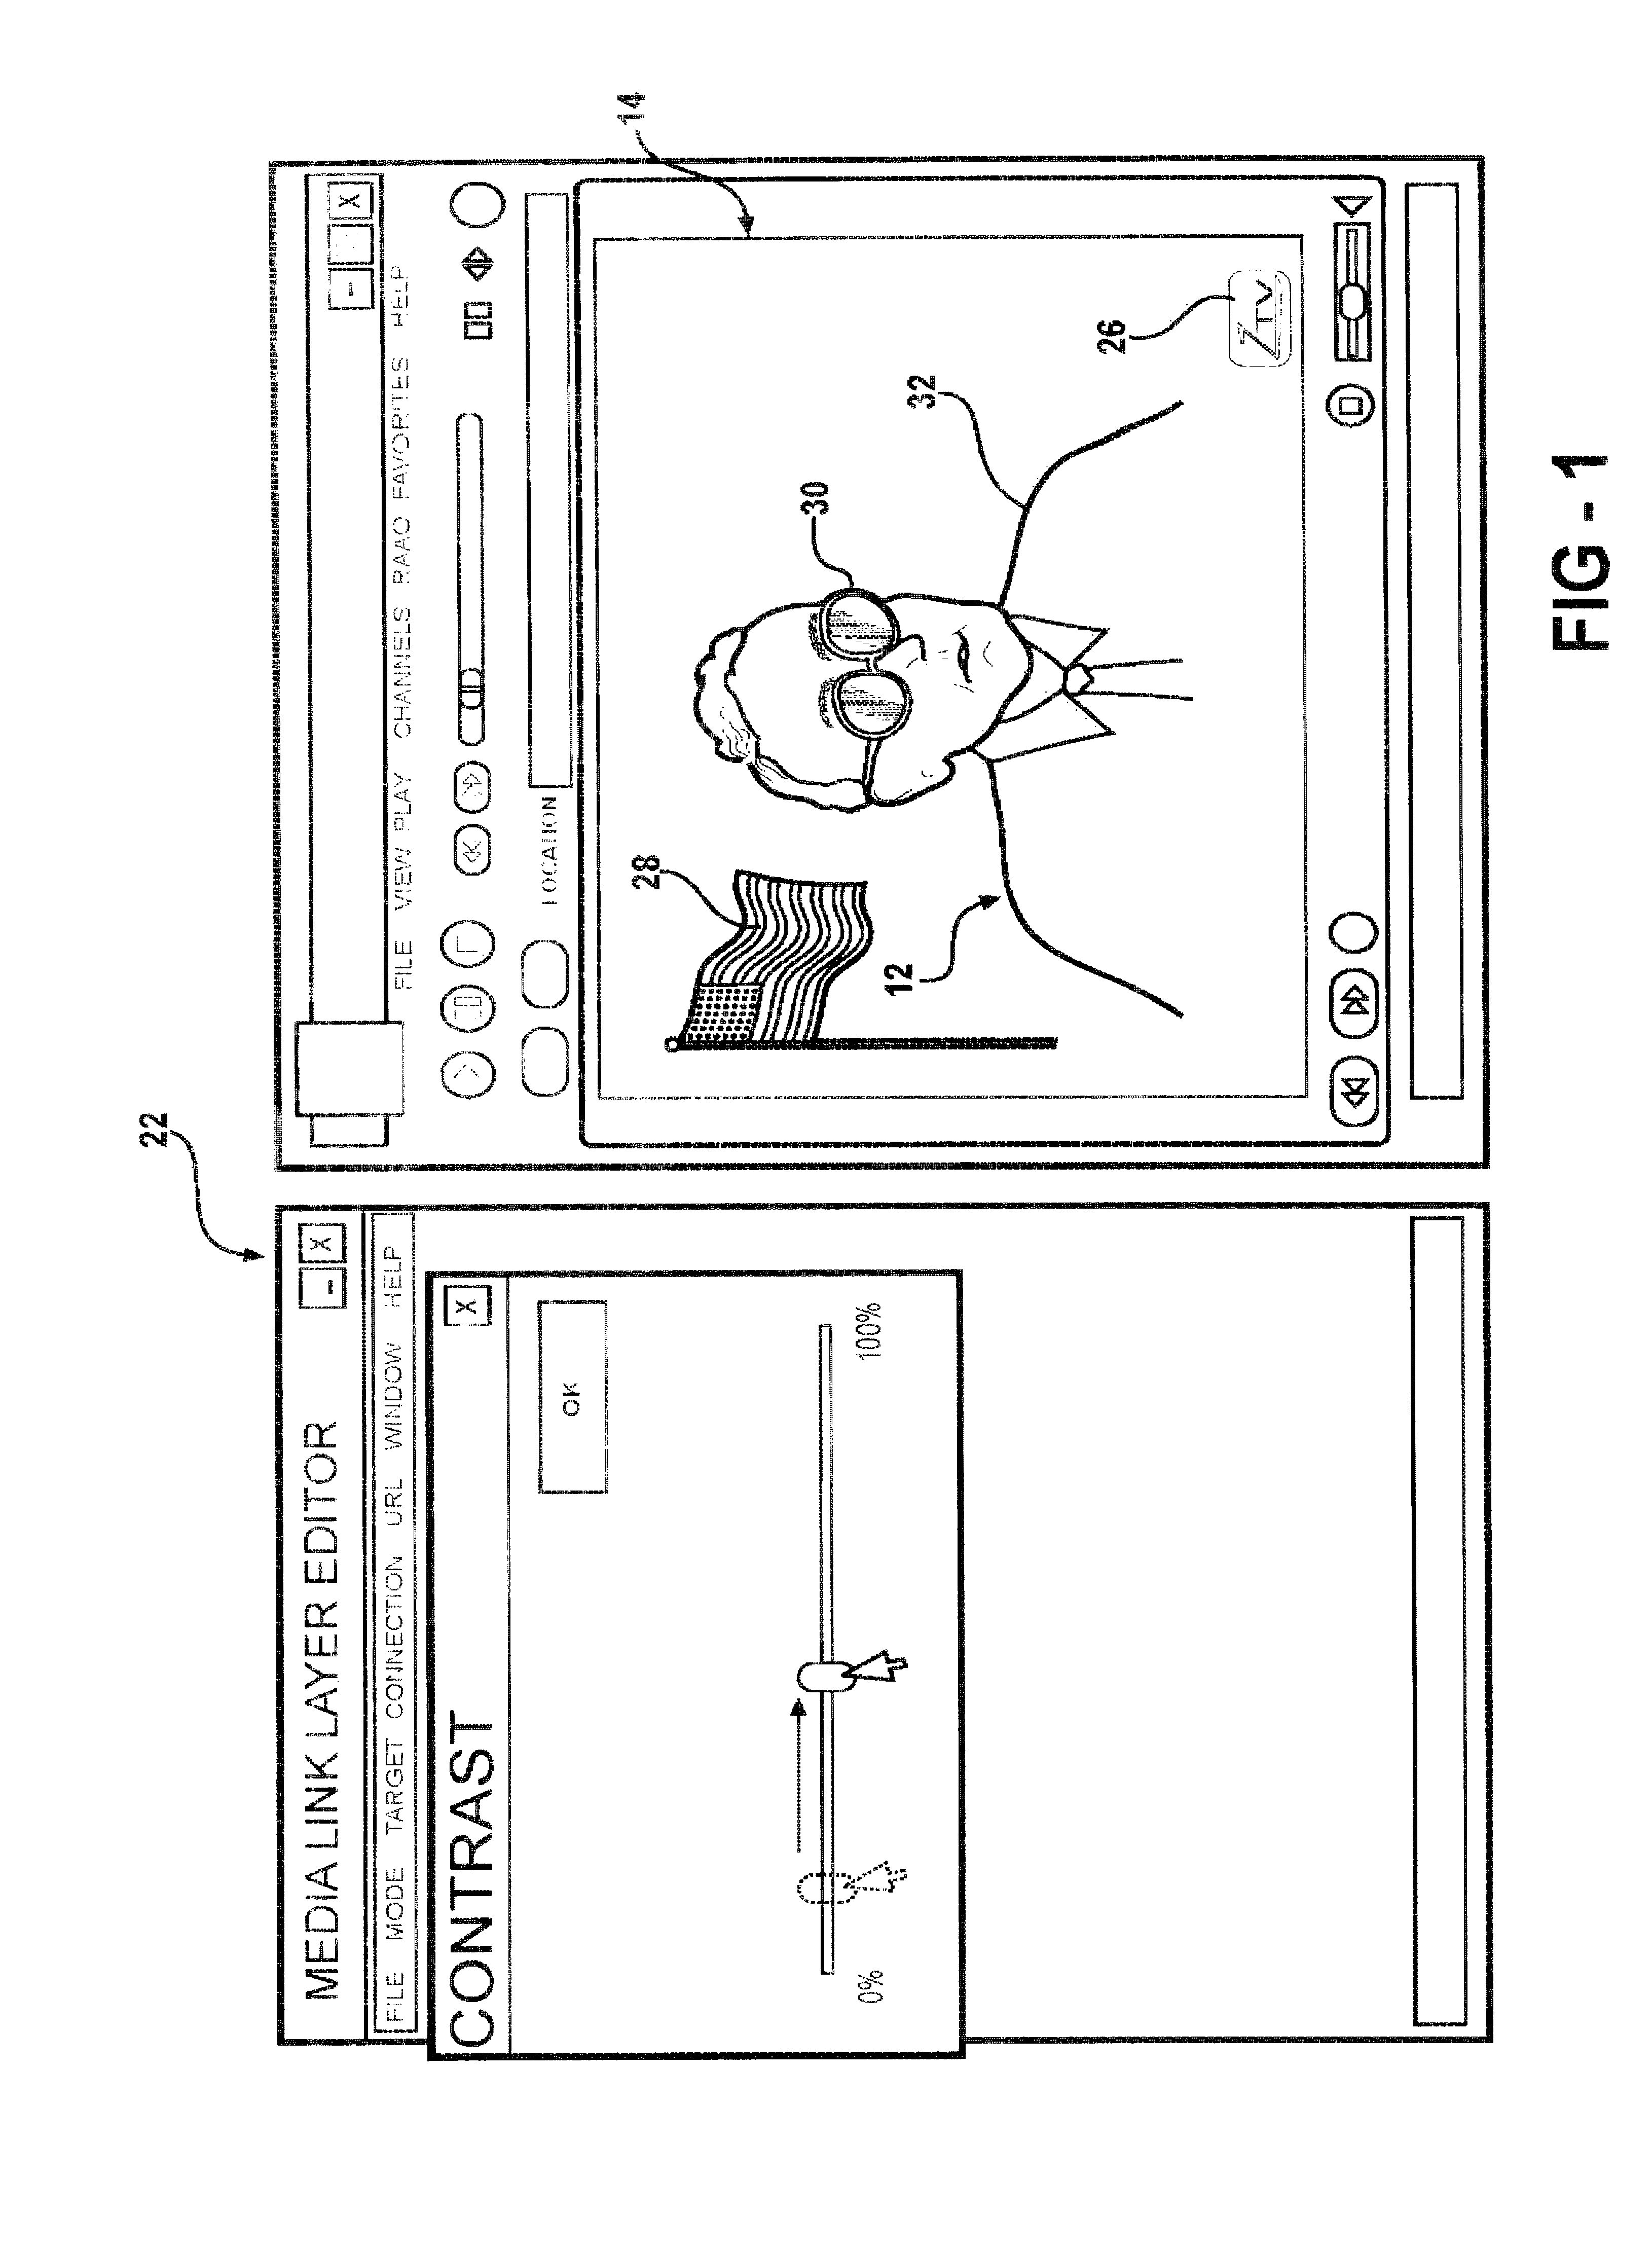 Method of retrieving information associated with an object present in a media stream